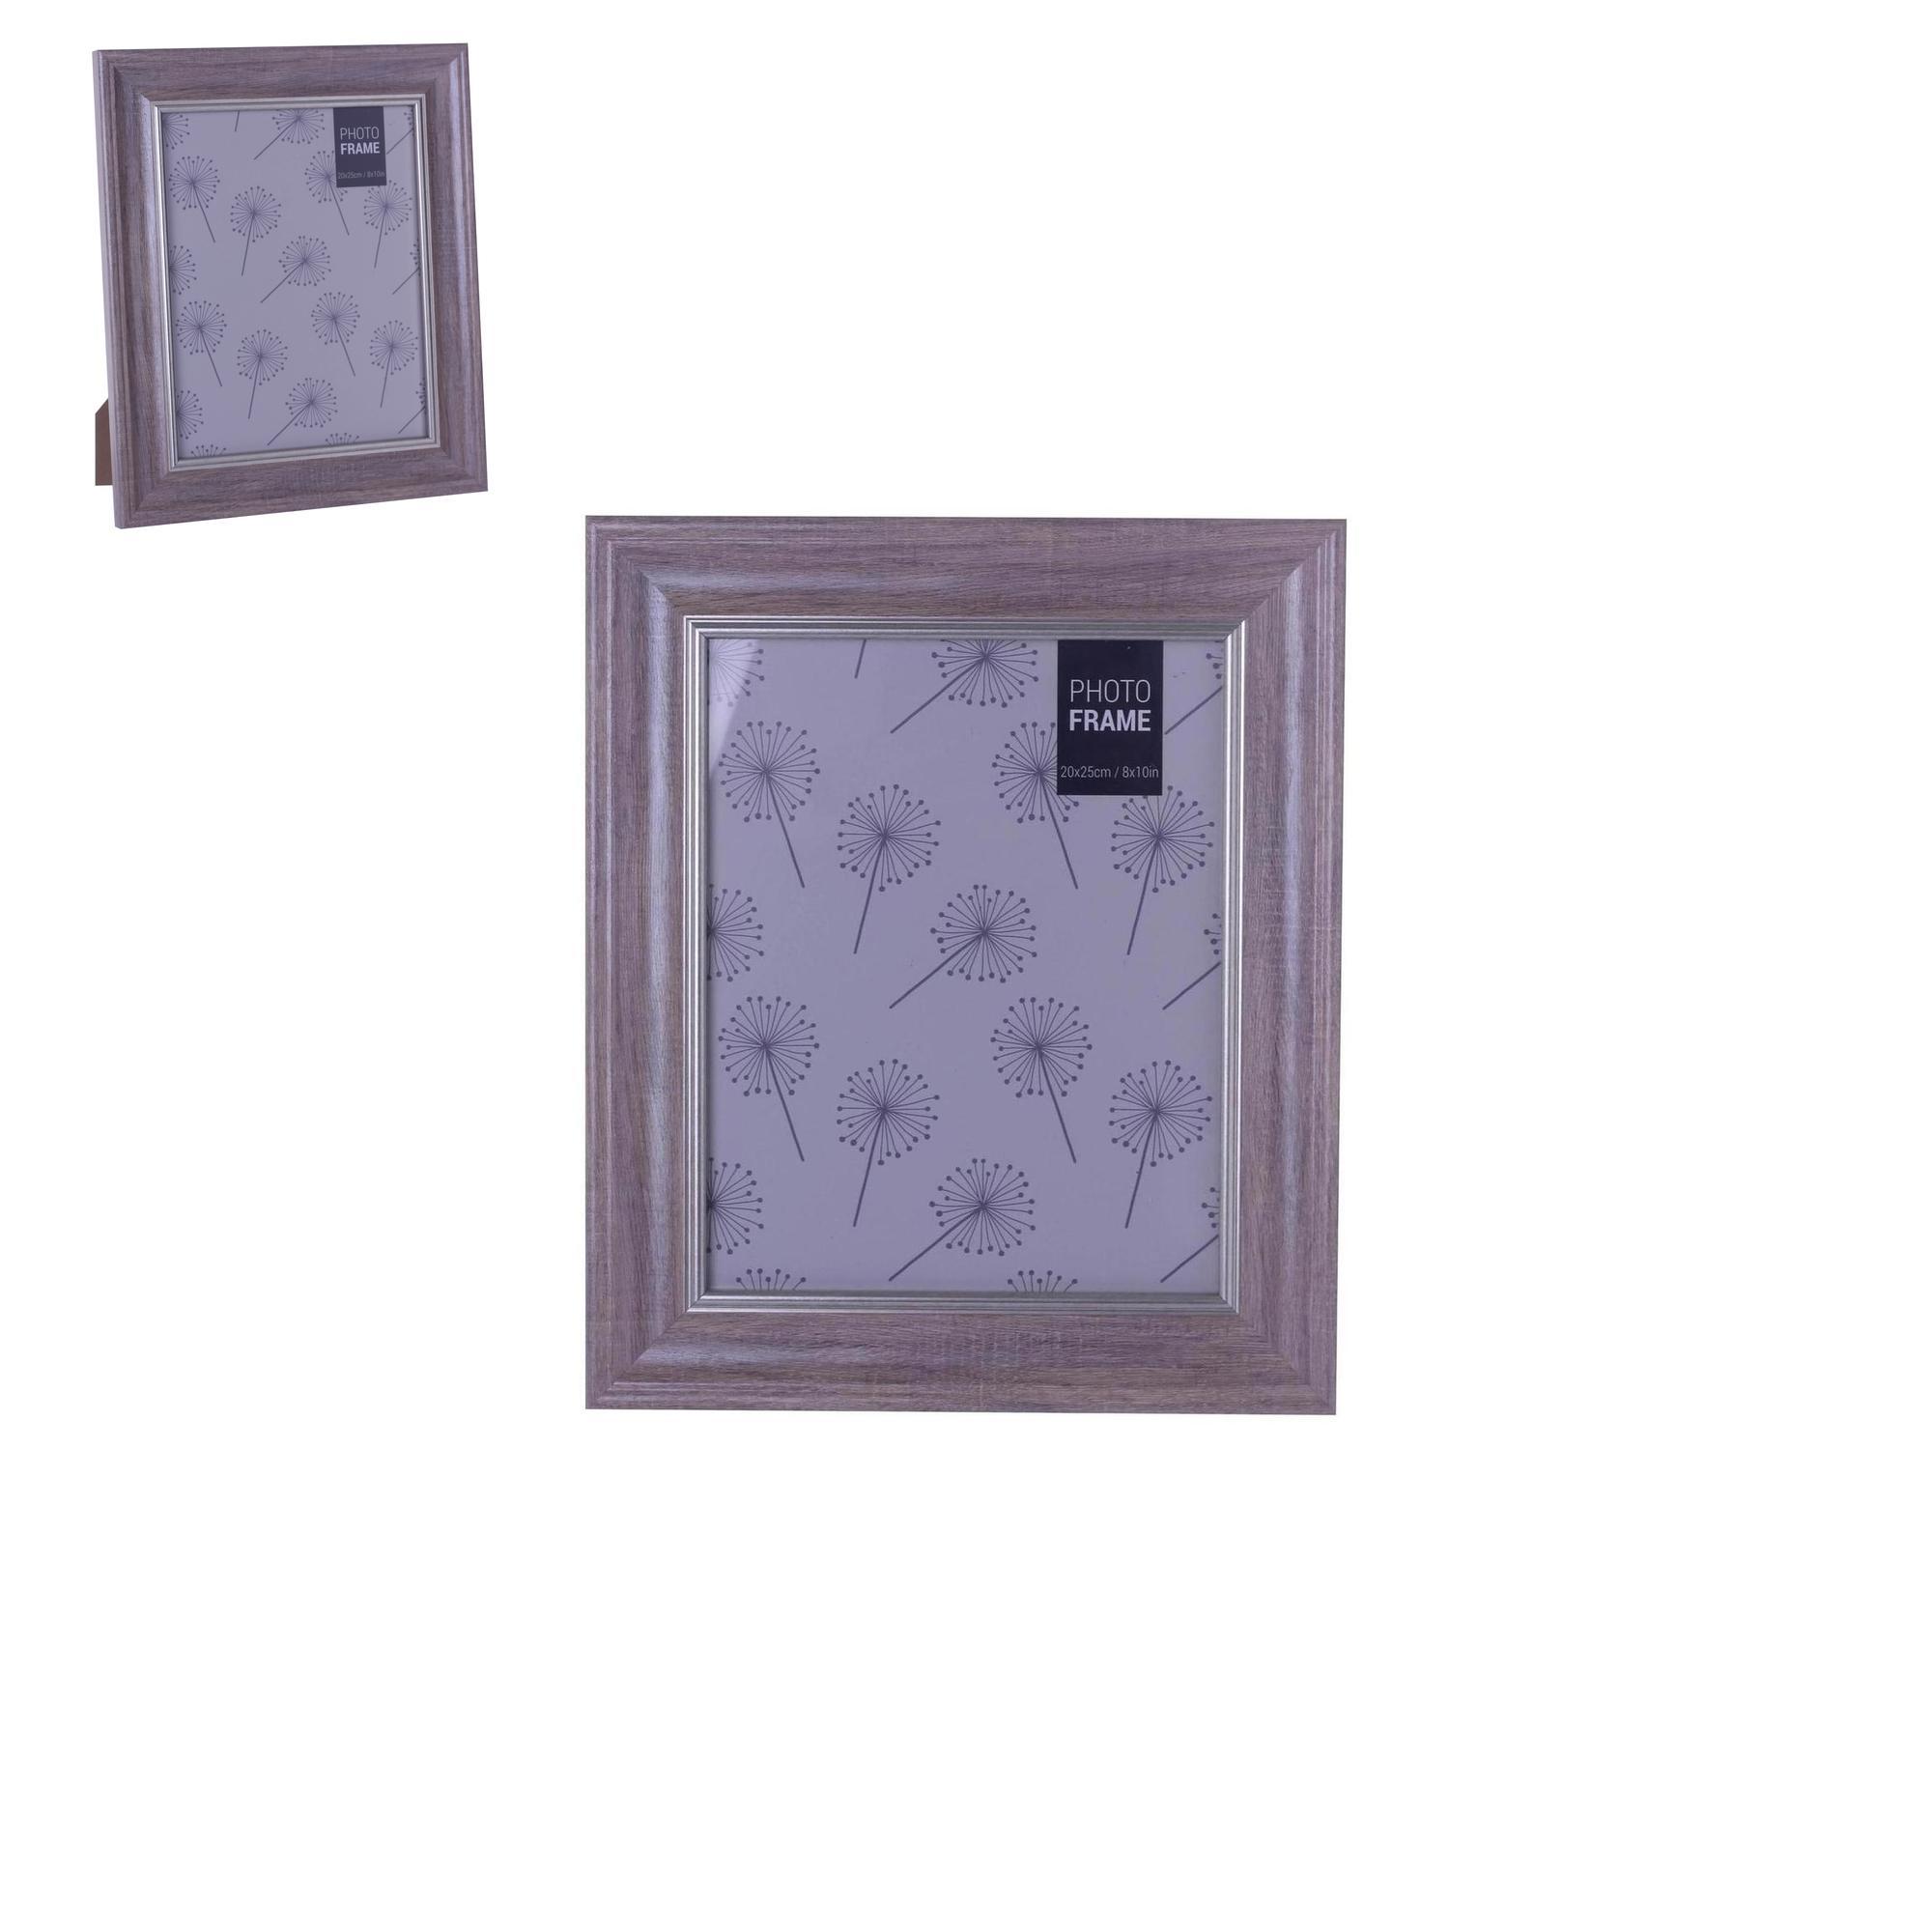 8X10 inch PICTURE FRAME - 531-26712